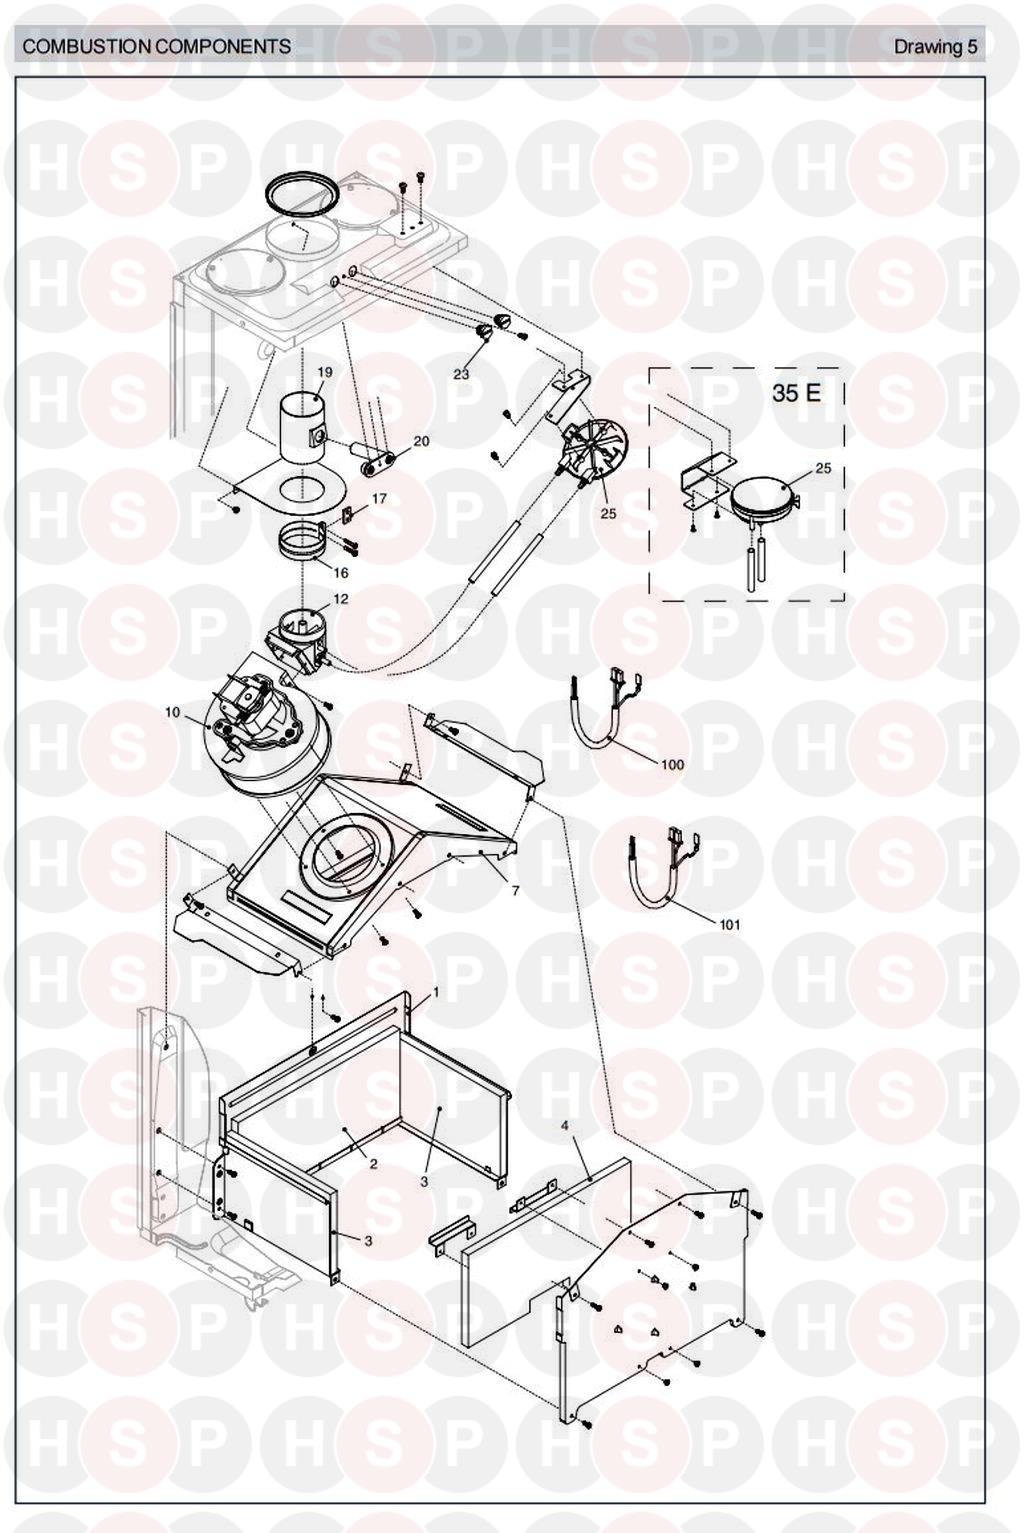 Combustion Chamber diagram for Vokera Mynute 28E